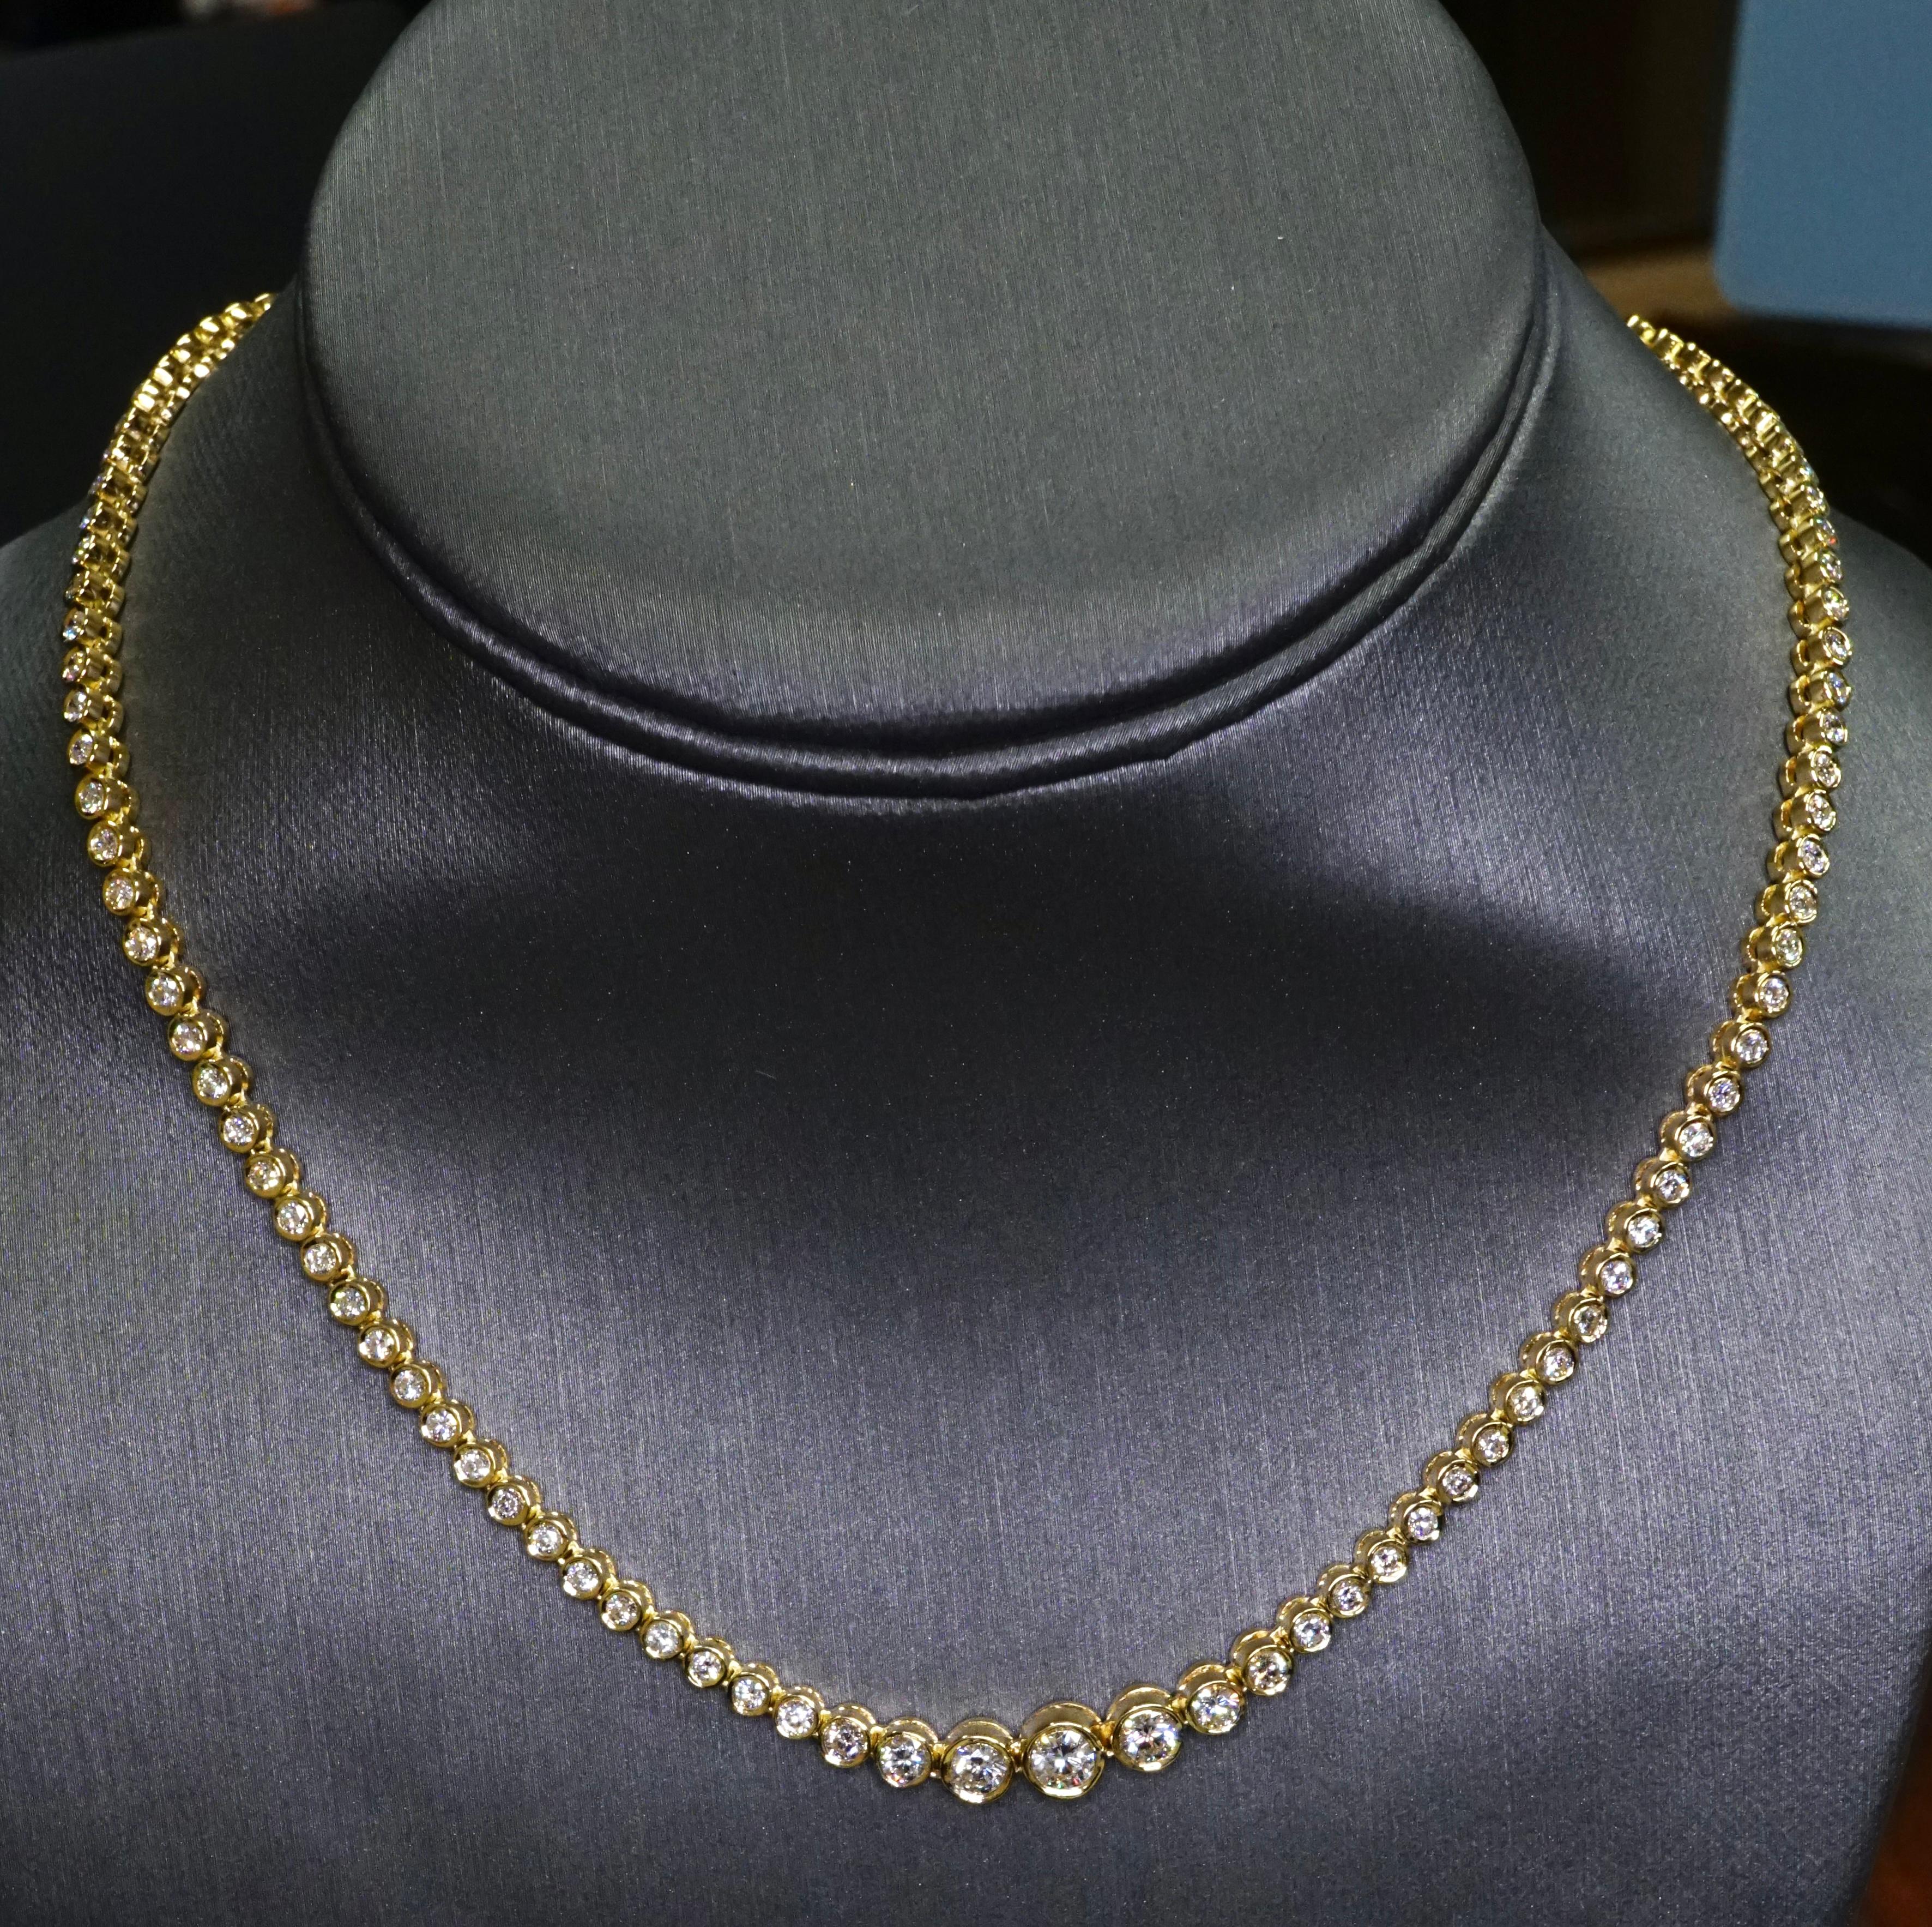 Diamond Tennis Necklace in 18K Yellow Gold. Bezel set natural brilliant round diamonds are F-G VS2-SI1. Total carat weight = 6.50ct. The length: 17